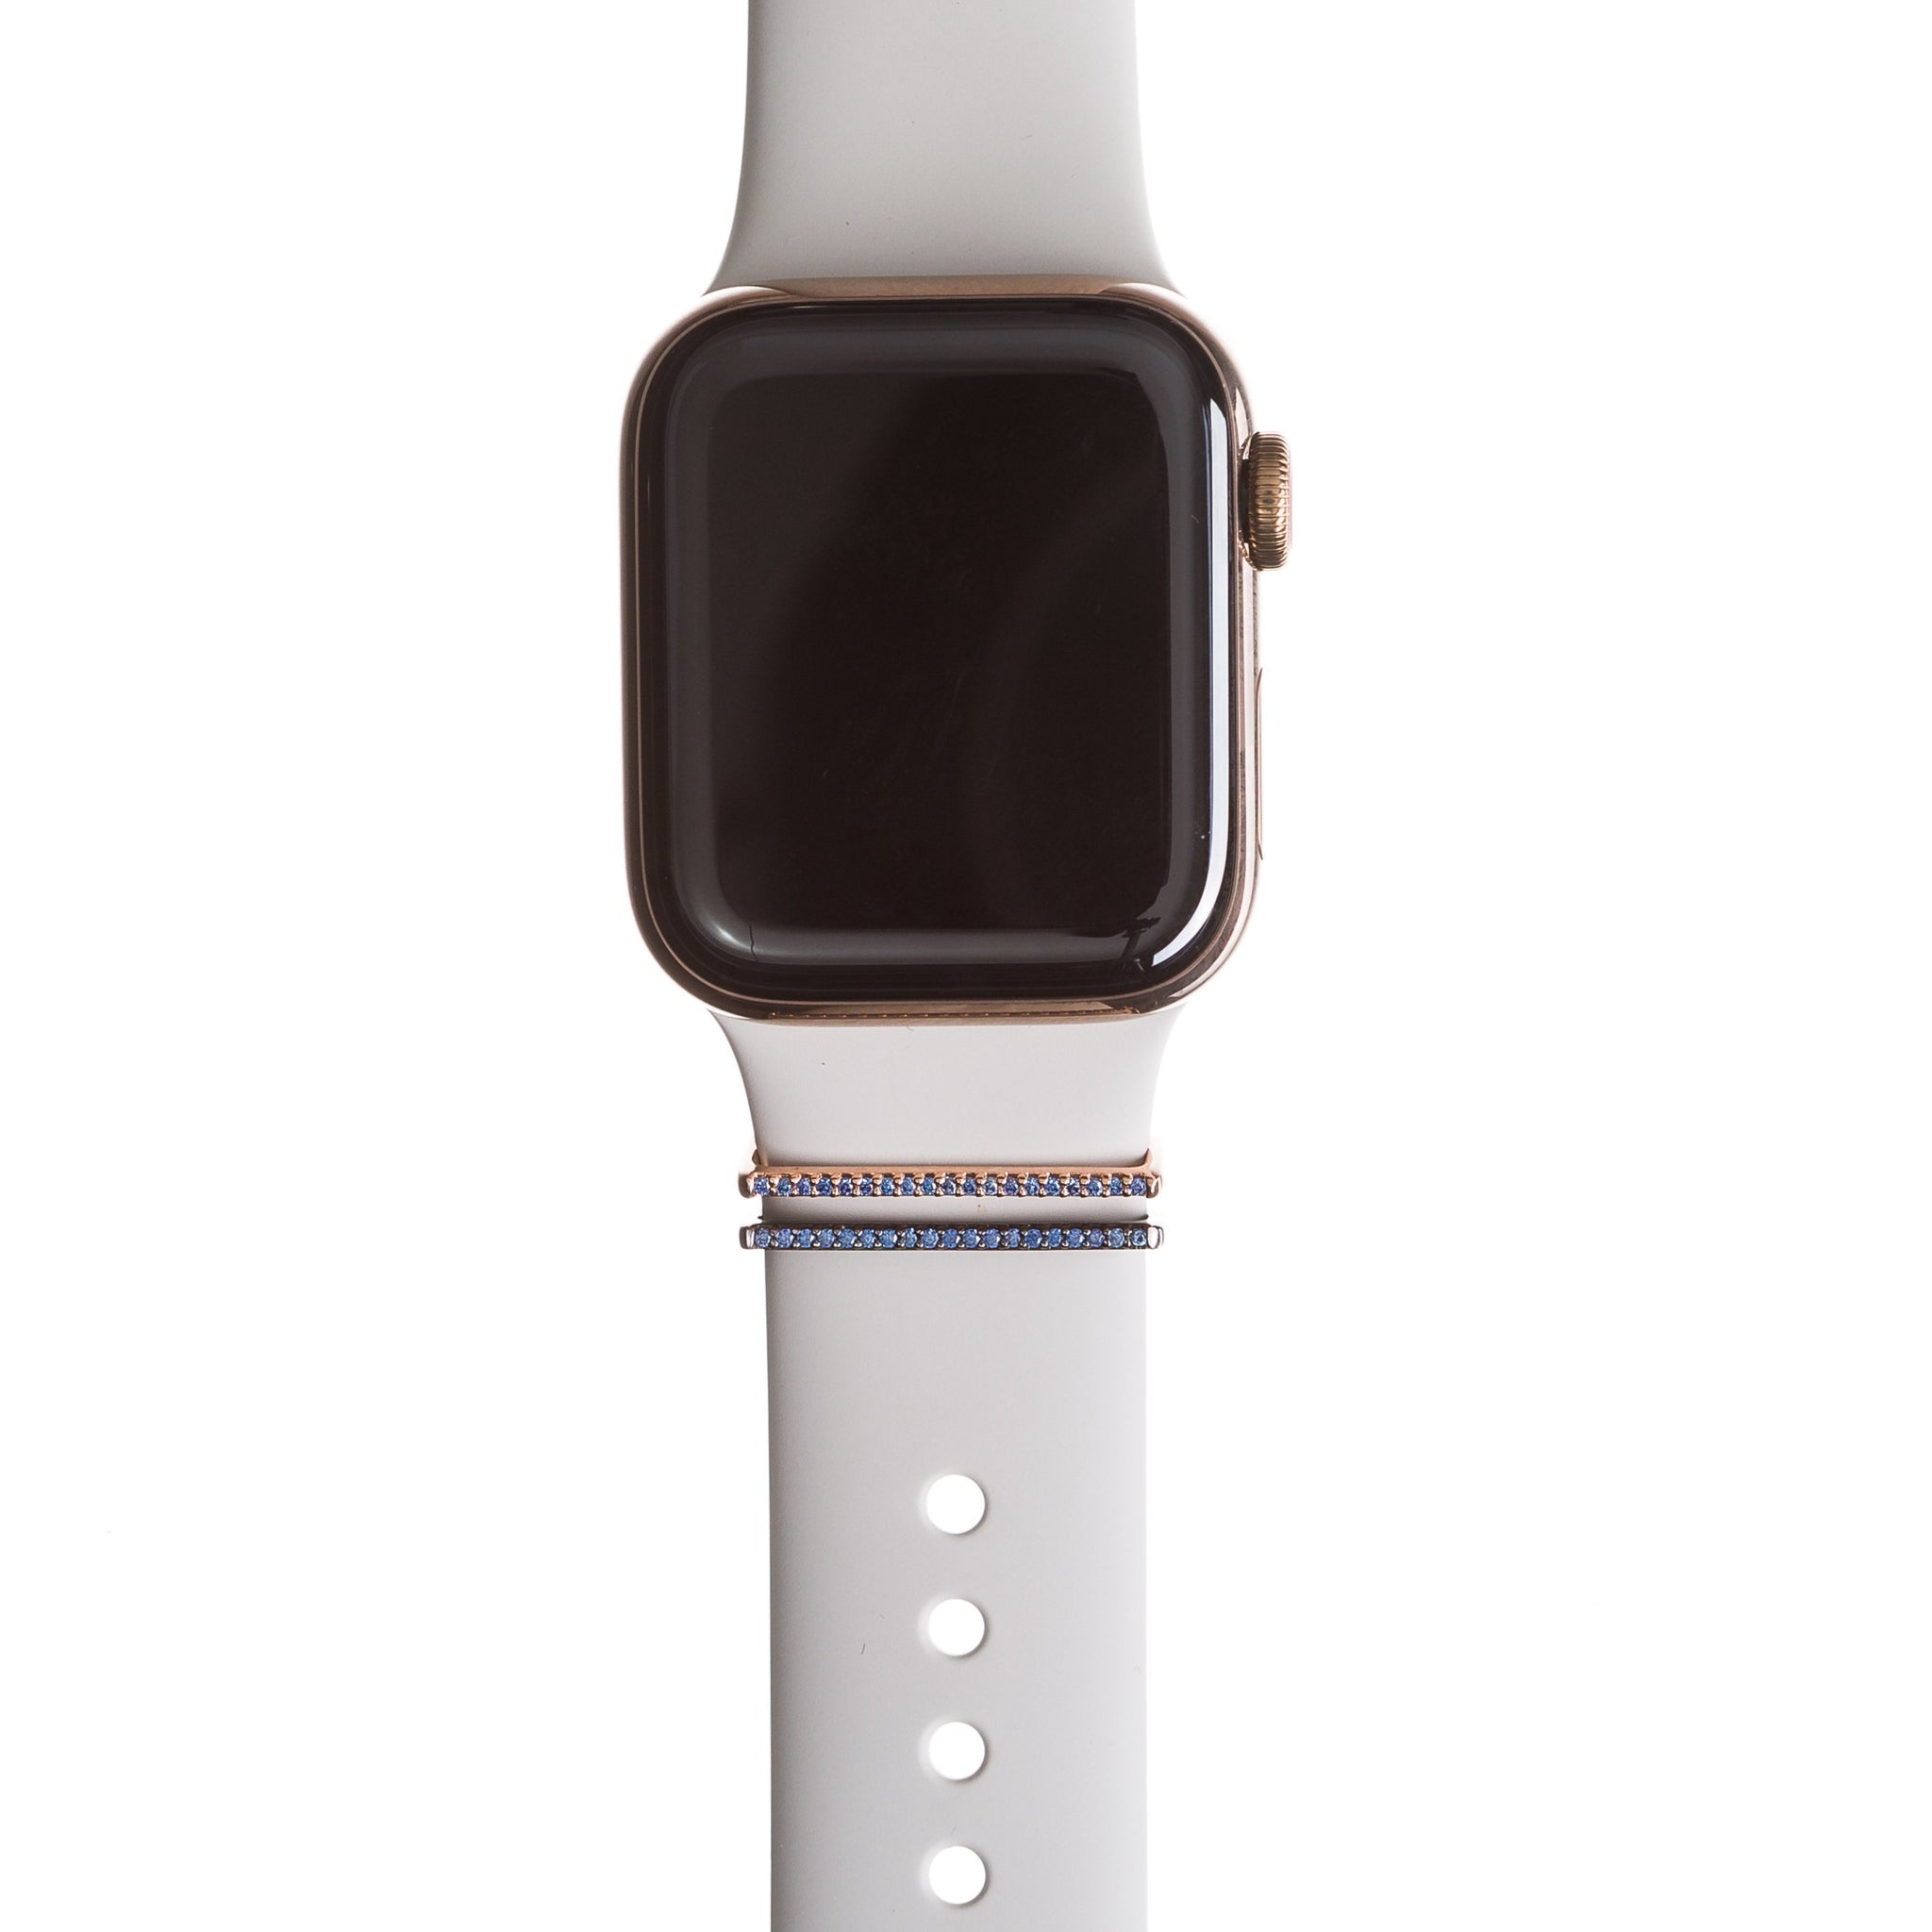 Byob Tiny Tanzanite Blue Rings For Apple Watch And Fitbit Bytten